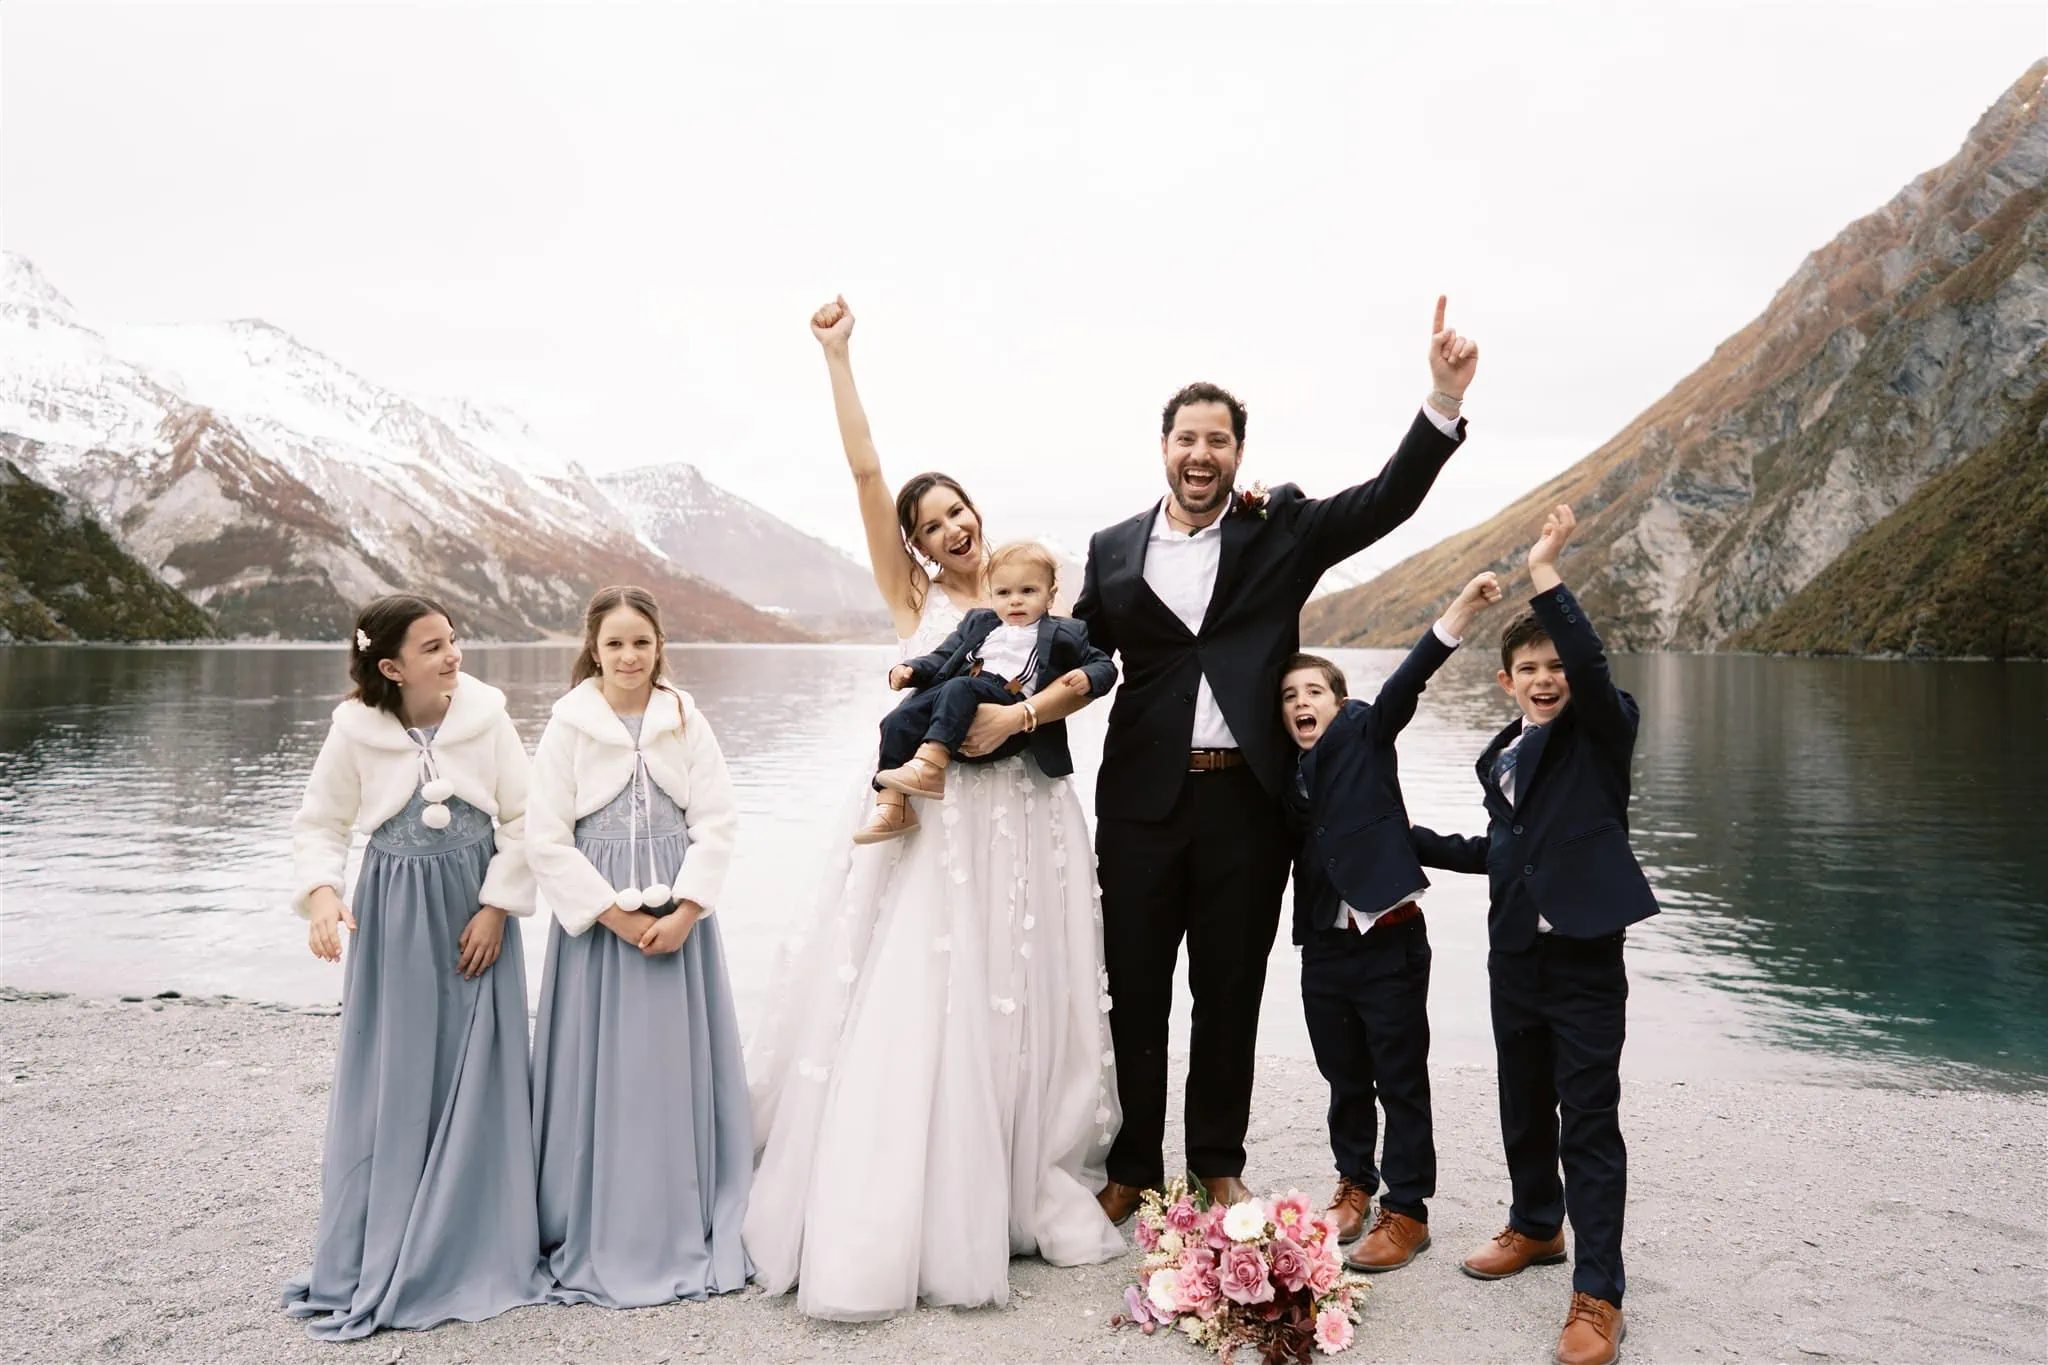 Queenstown New Zealand Elopement Wedding Photographer - A wedding party with their arms raised in the air, stargazing in front of a lake.